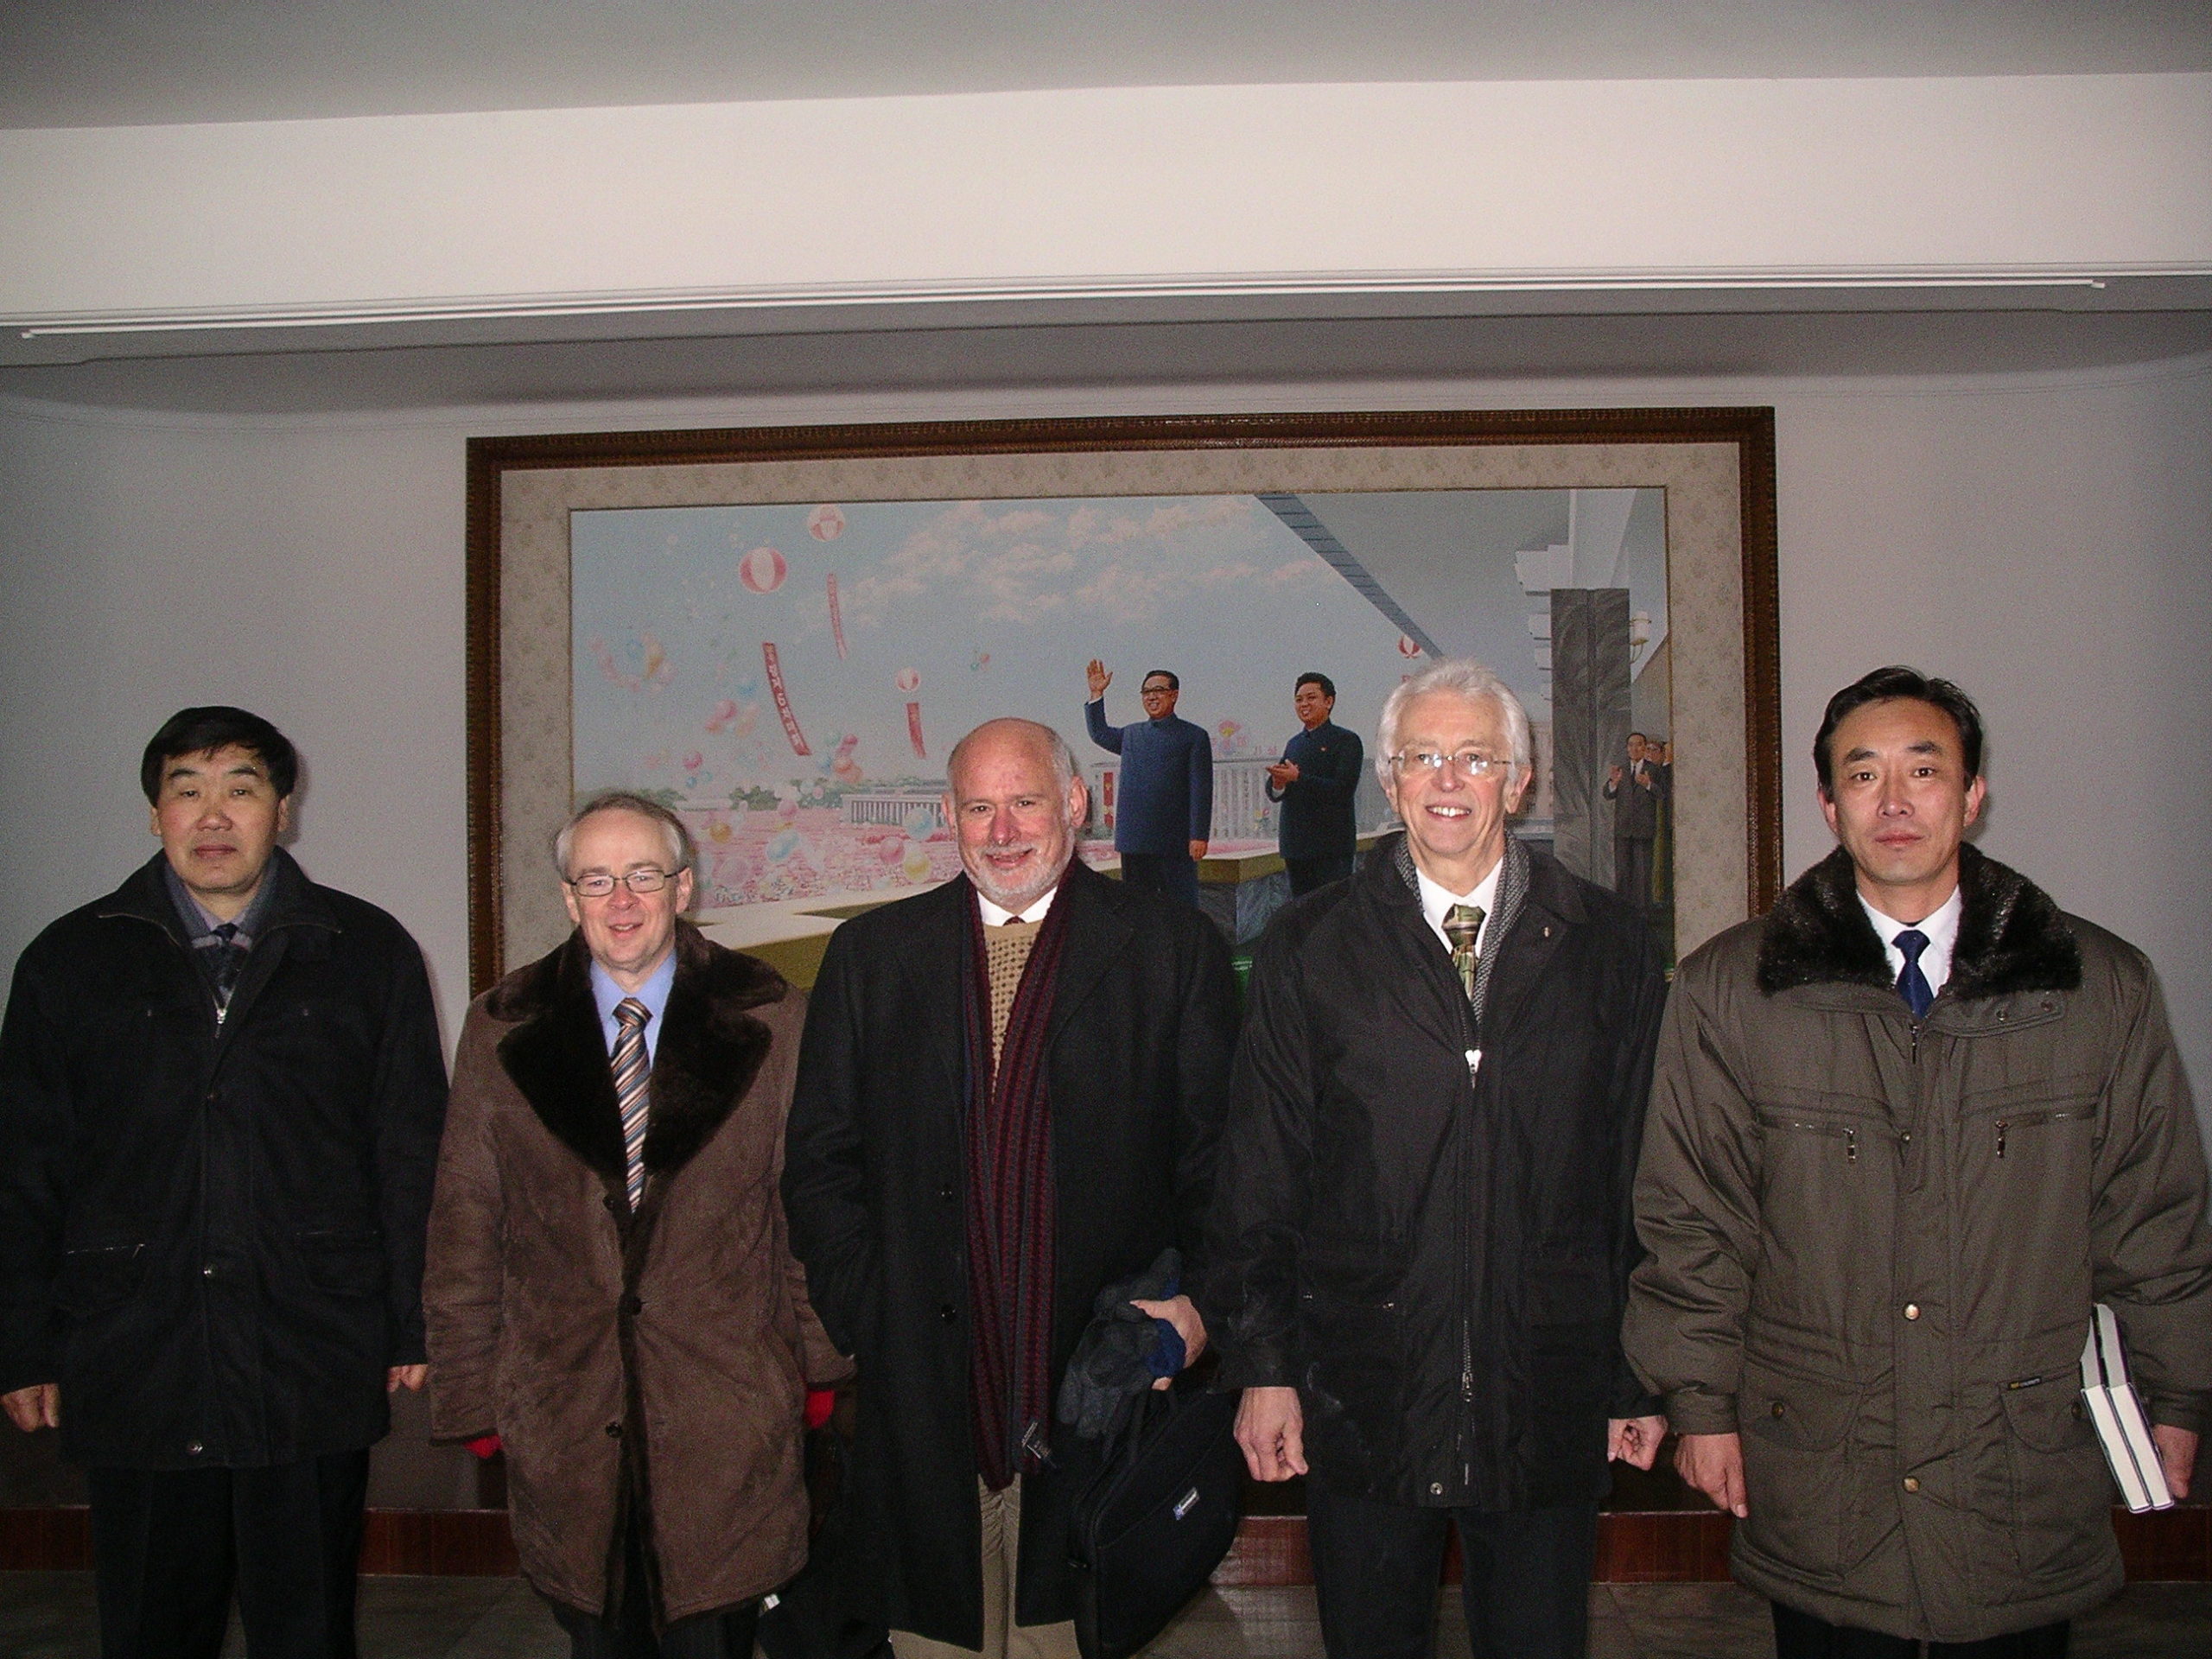 Three Americans flanked by two Koreans all wearing winter coats posing for photo in front of a painting of DPRK leaders